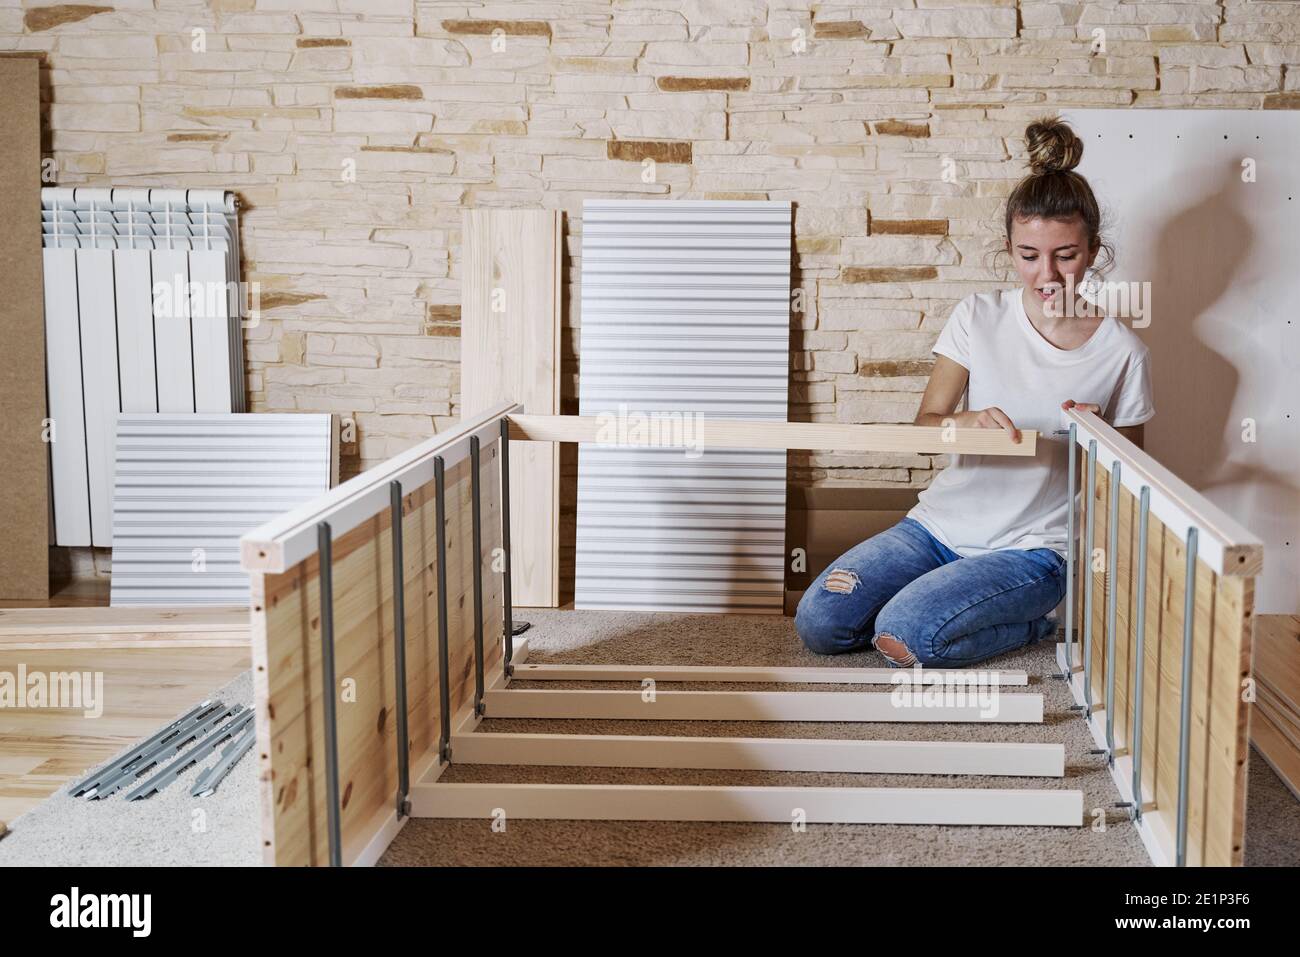 Front view of a young blonde girl screwing a screw with a screwdriver in a  strip of a furniture assembling by herself a wardrobe of wood. Horizontal p  Stock Photo - Alamy